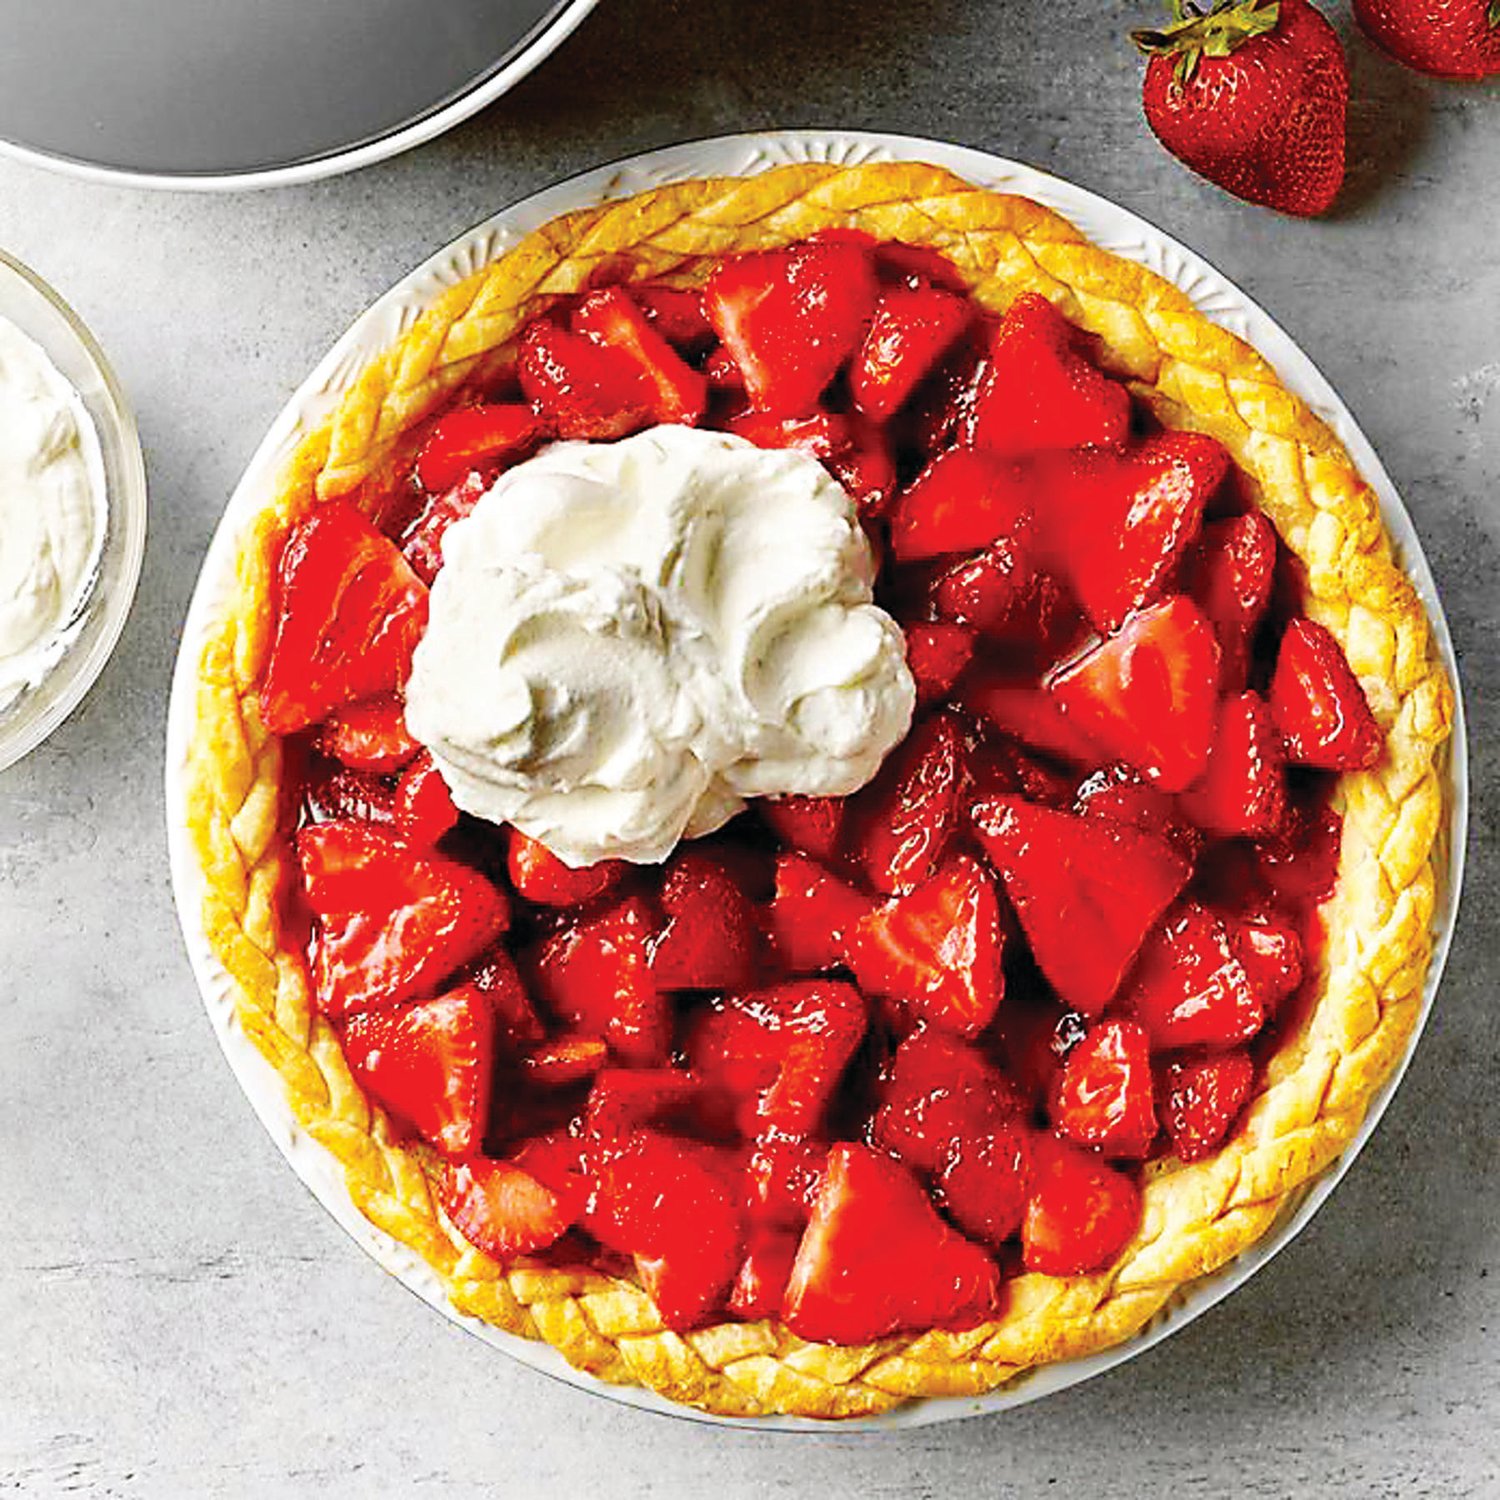 Fresh strawberry pie is one way to enjoy the local strawberries now in season.